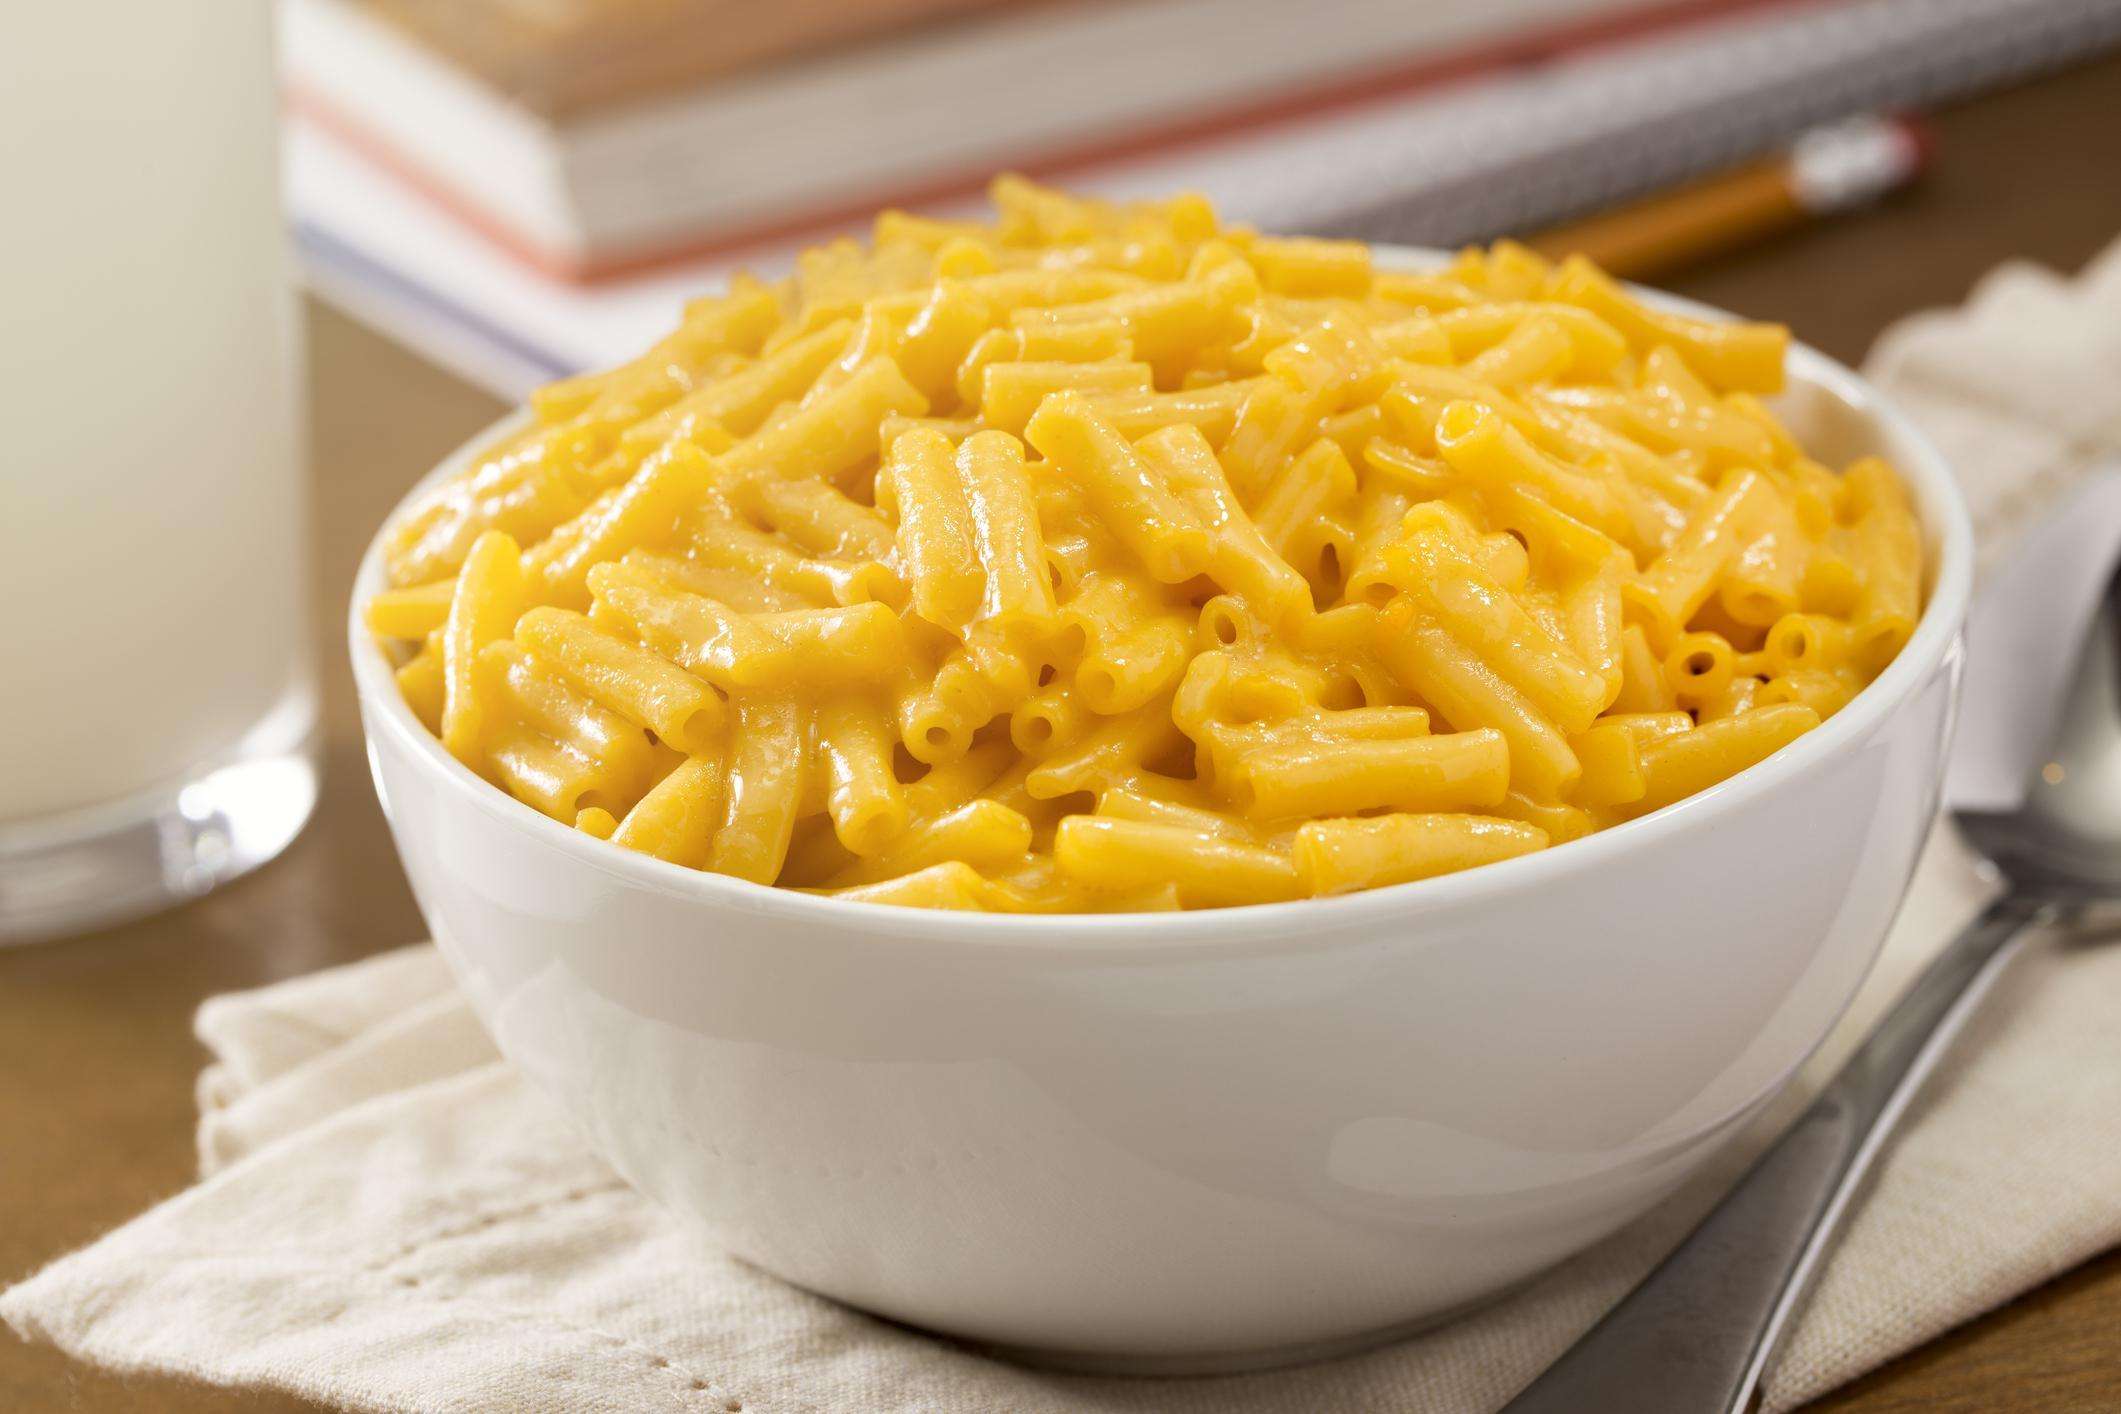 Kraft Mac and Cheese Is Better Than Homemade